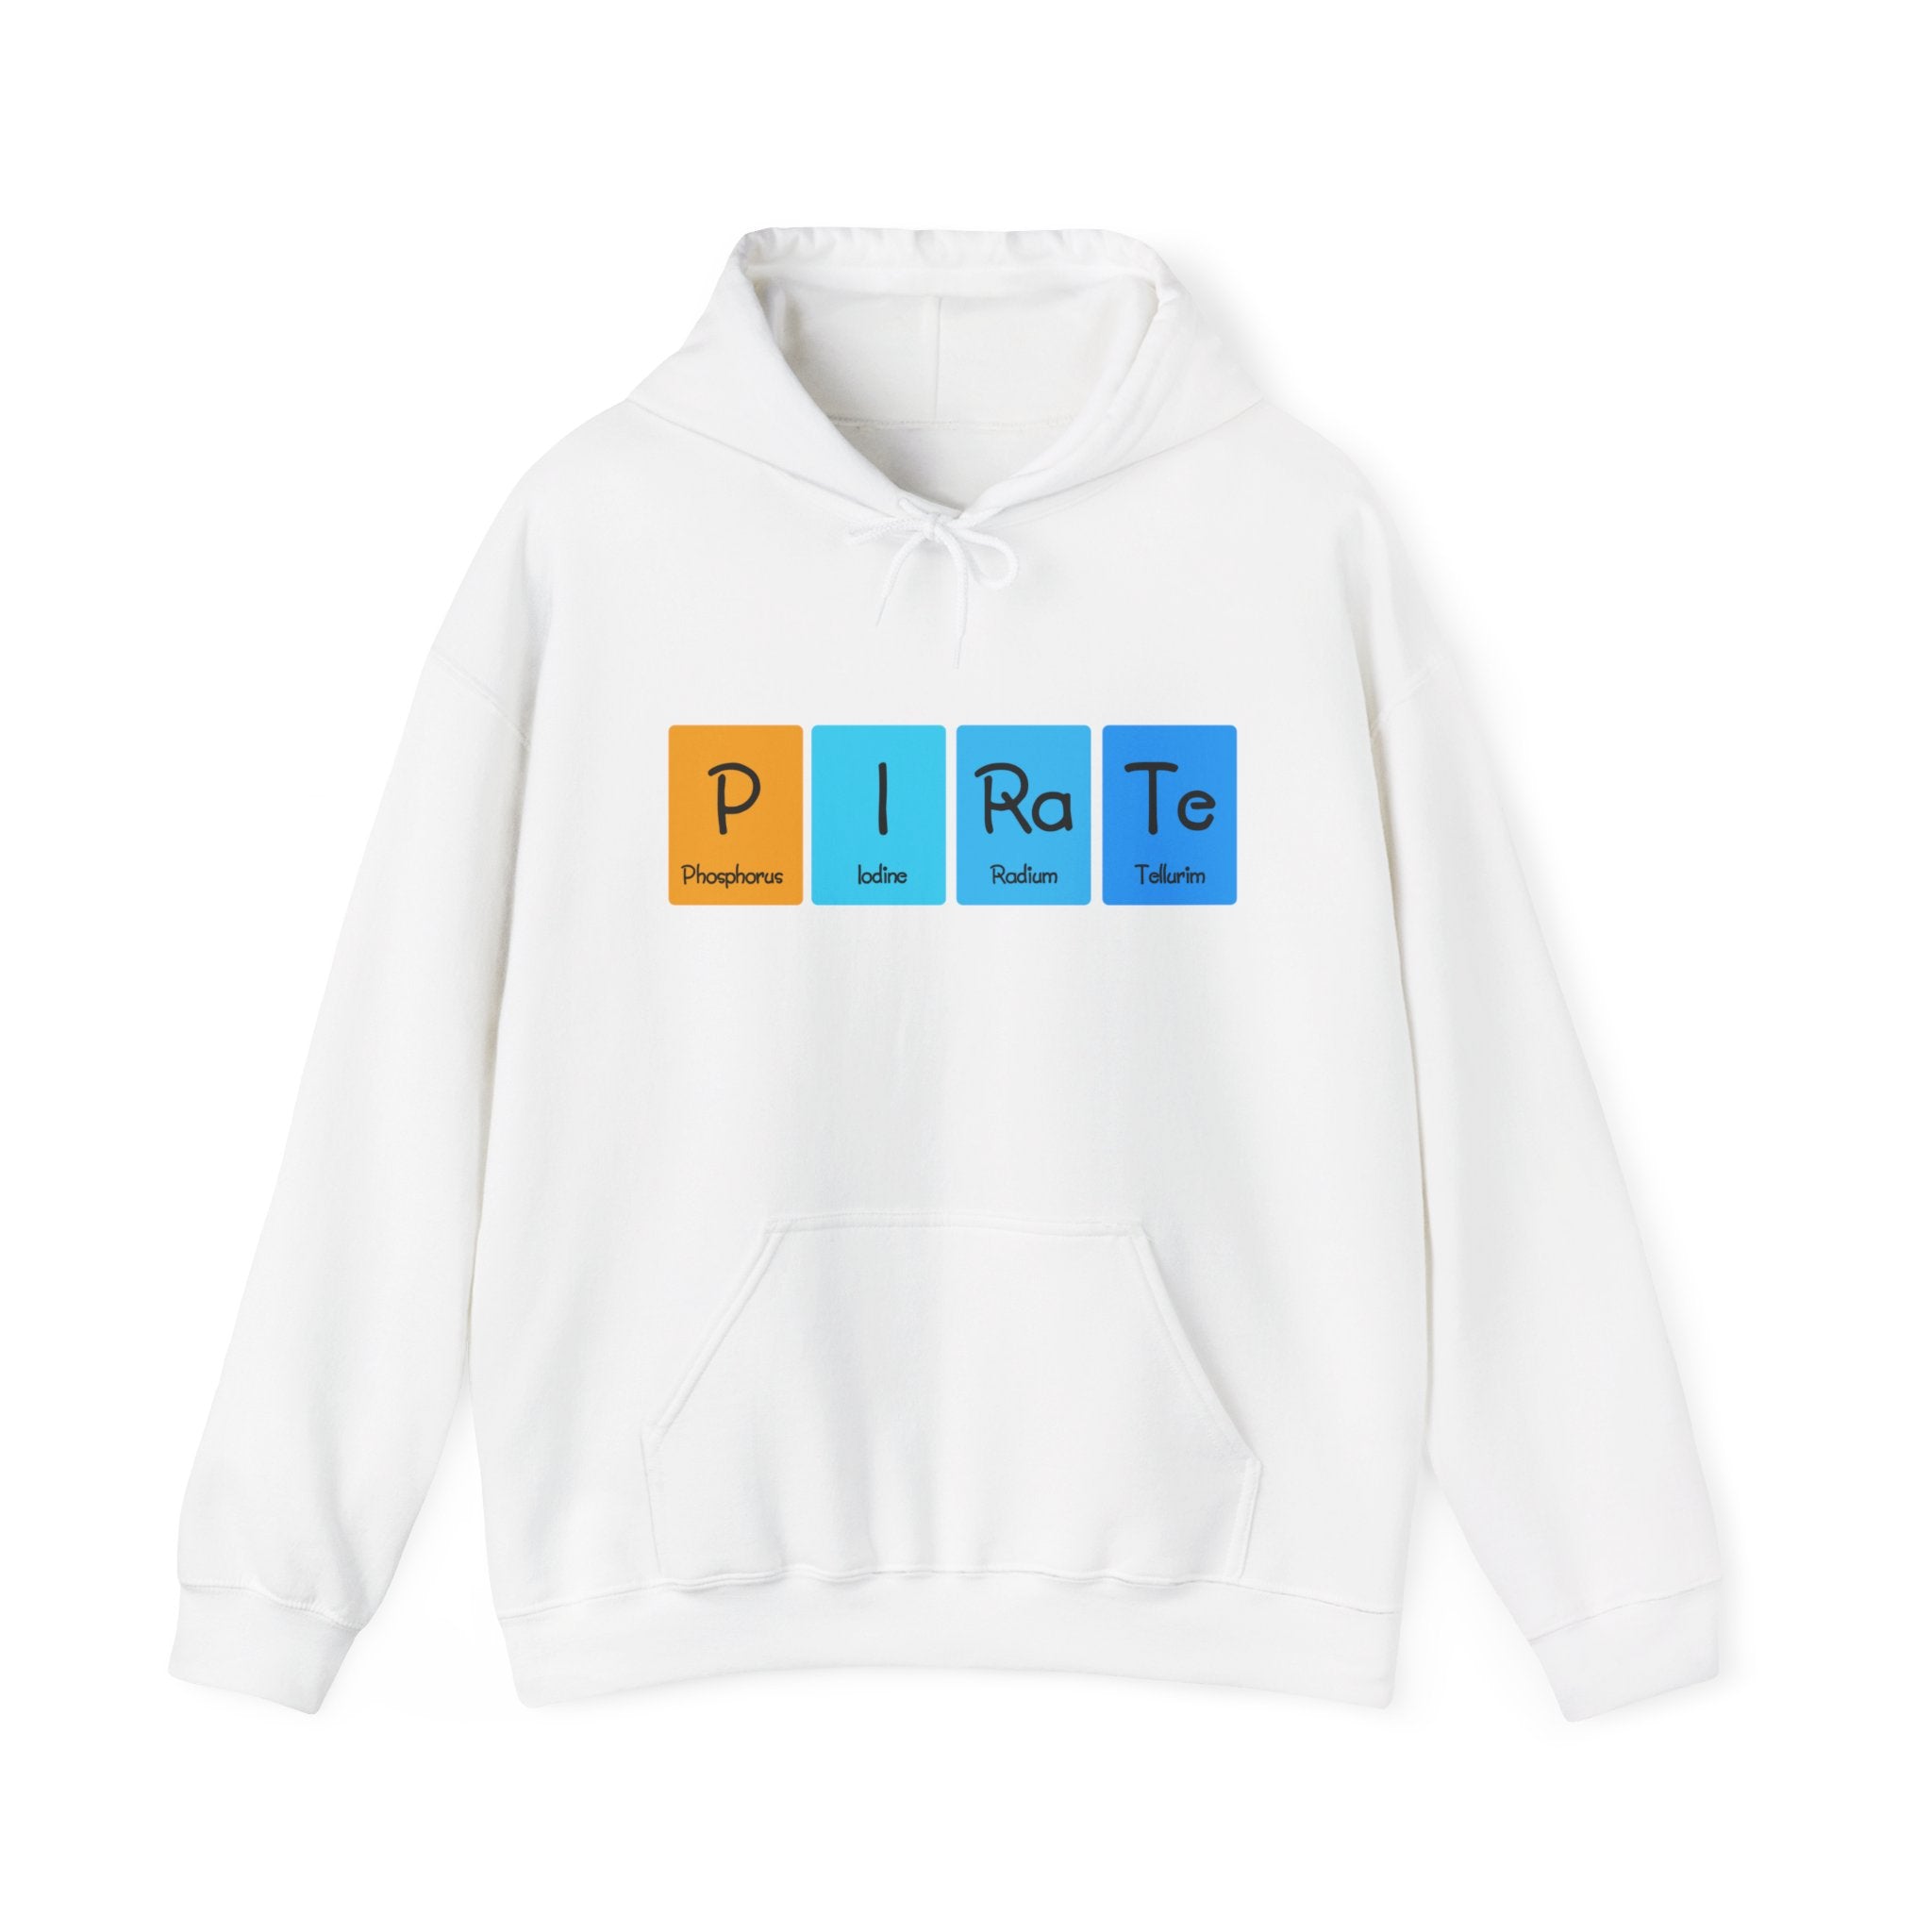 This P-I-Ra-Te - Hooded Sweatshirt features a white hoodie with periodic table elements spelling "PIRATE" in colored blocks: Phosphorus (P), Iodine (I), Radium (Ra), and Tellurium (Te). Combining style and comfort, it's perfect for any science enthusiast.